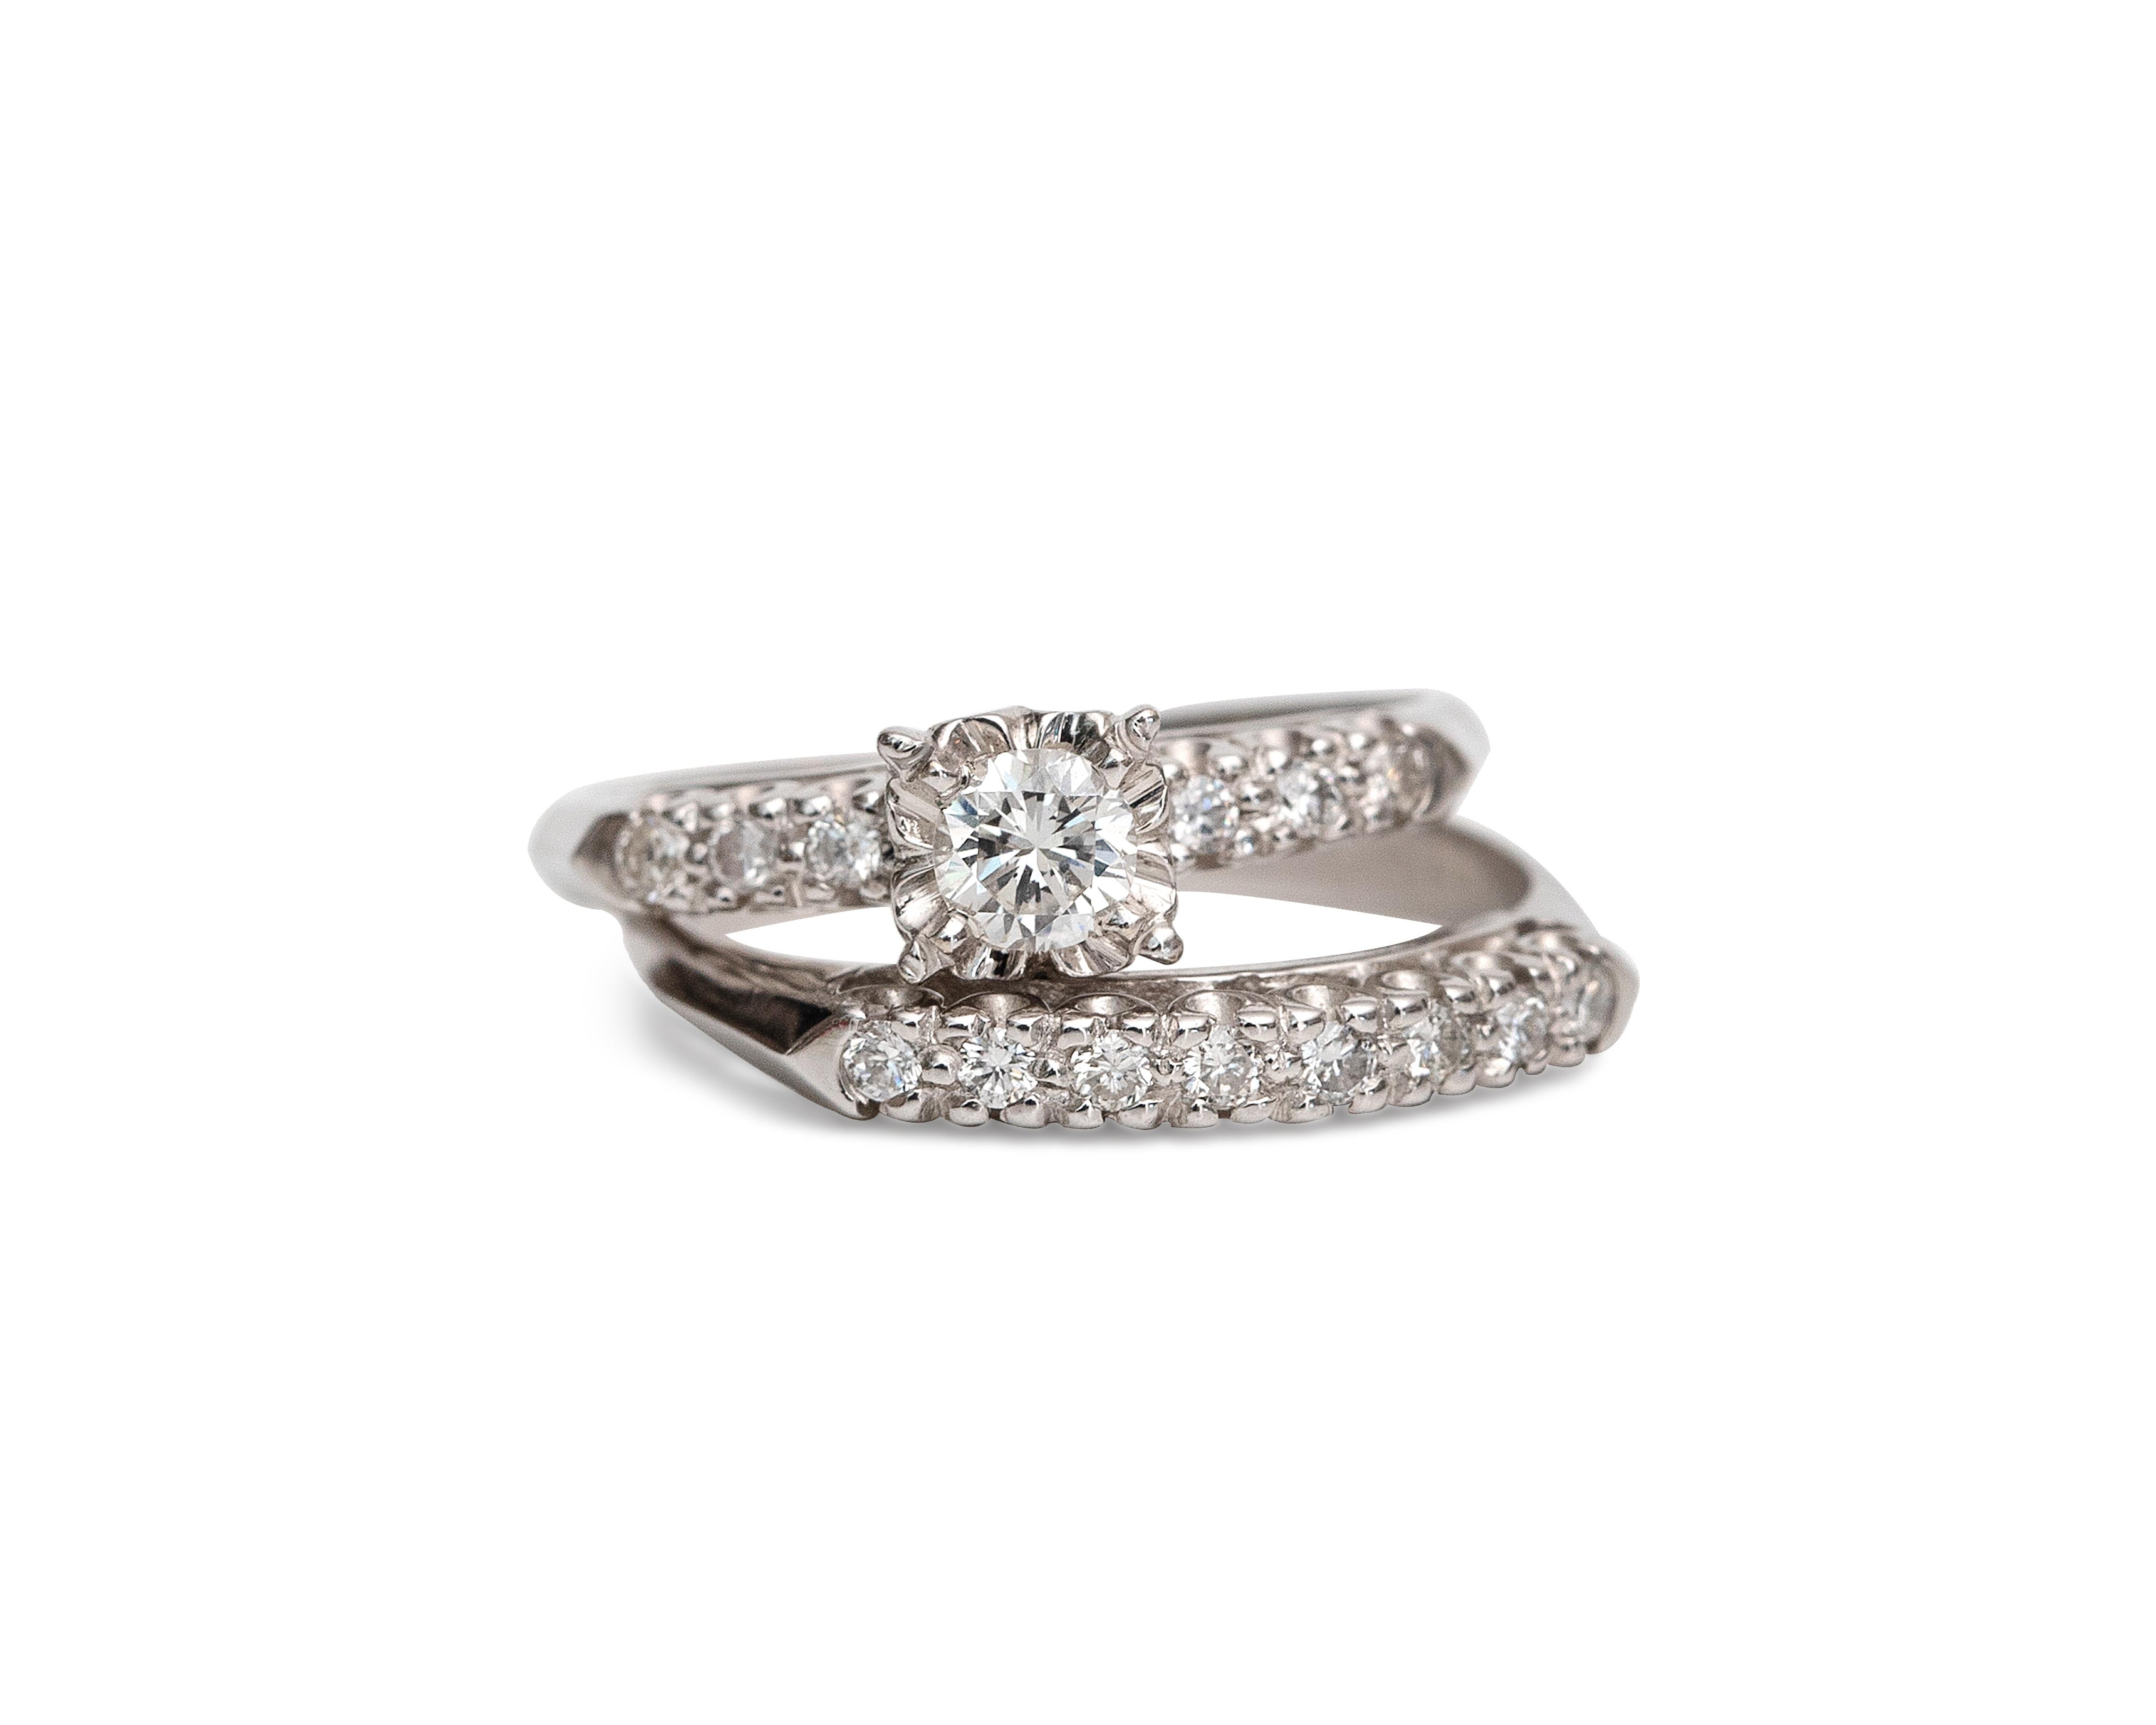 Here we have a Vintage 1950's 14K white gold engagement ring set. So many dazzling accent diamonds in this duo weighing .05 carats and a 1.01-carat center diamond that takes the stage! This piece would make a perfect bridal set for the big day or